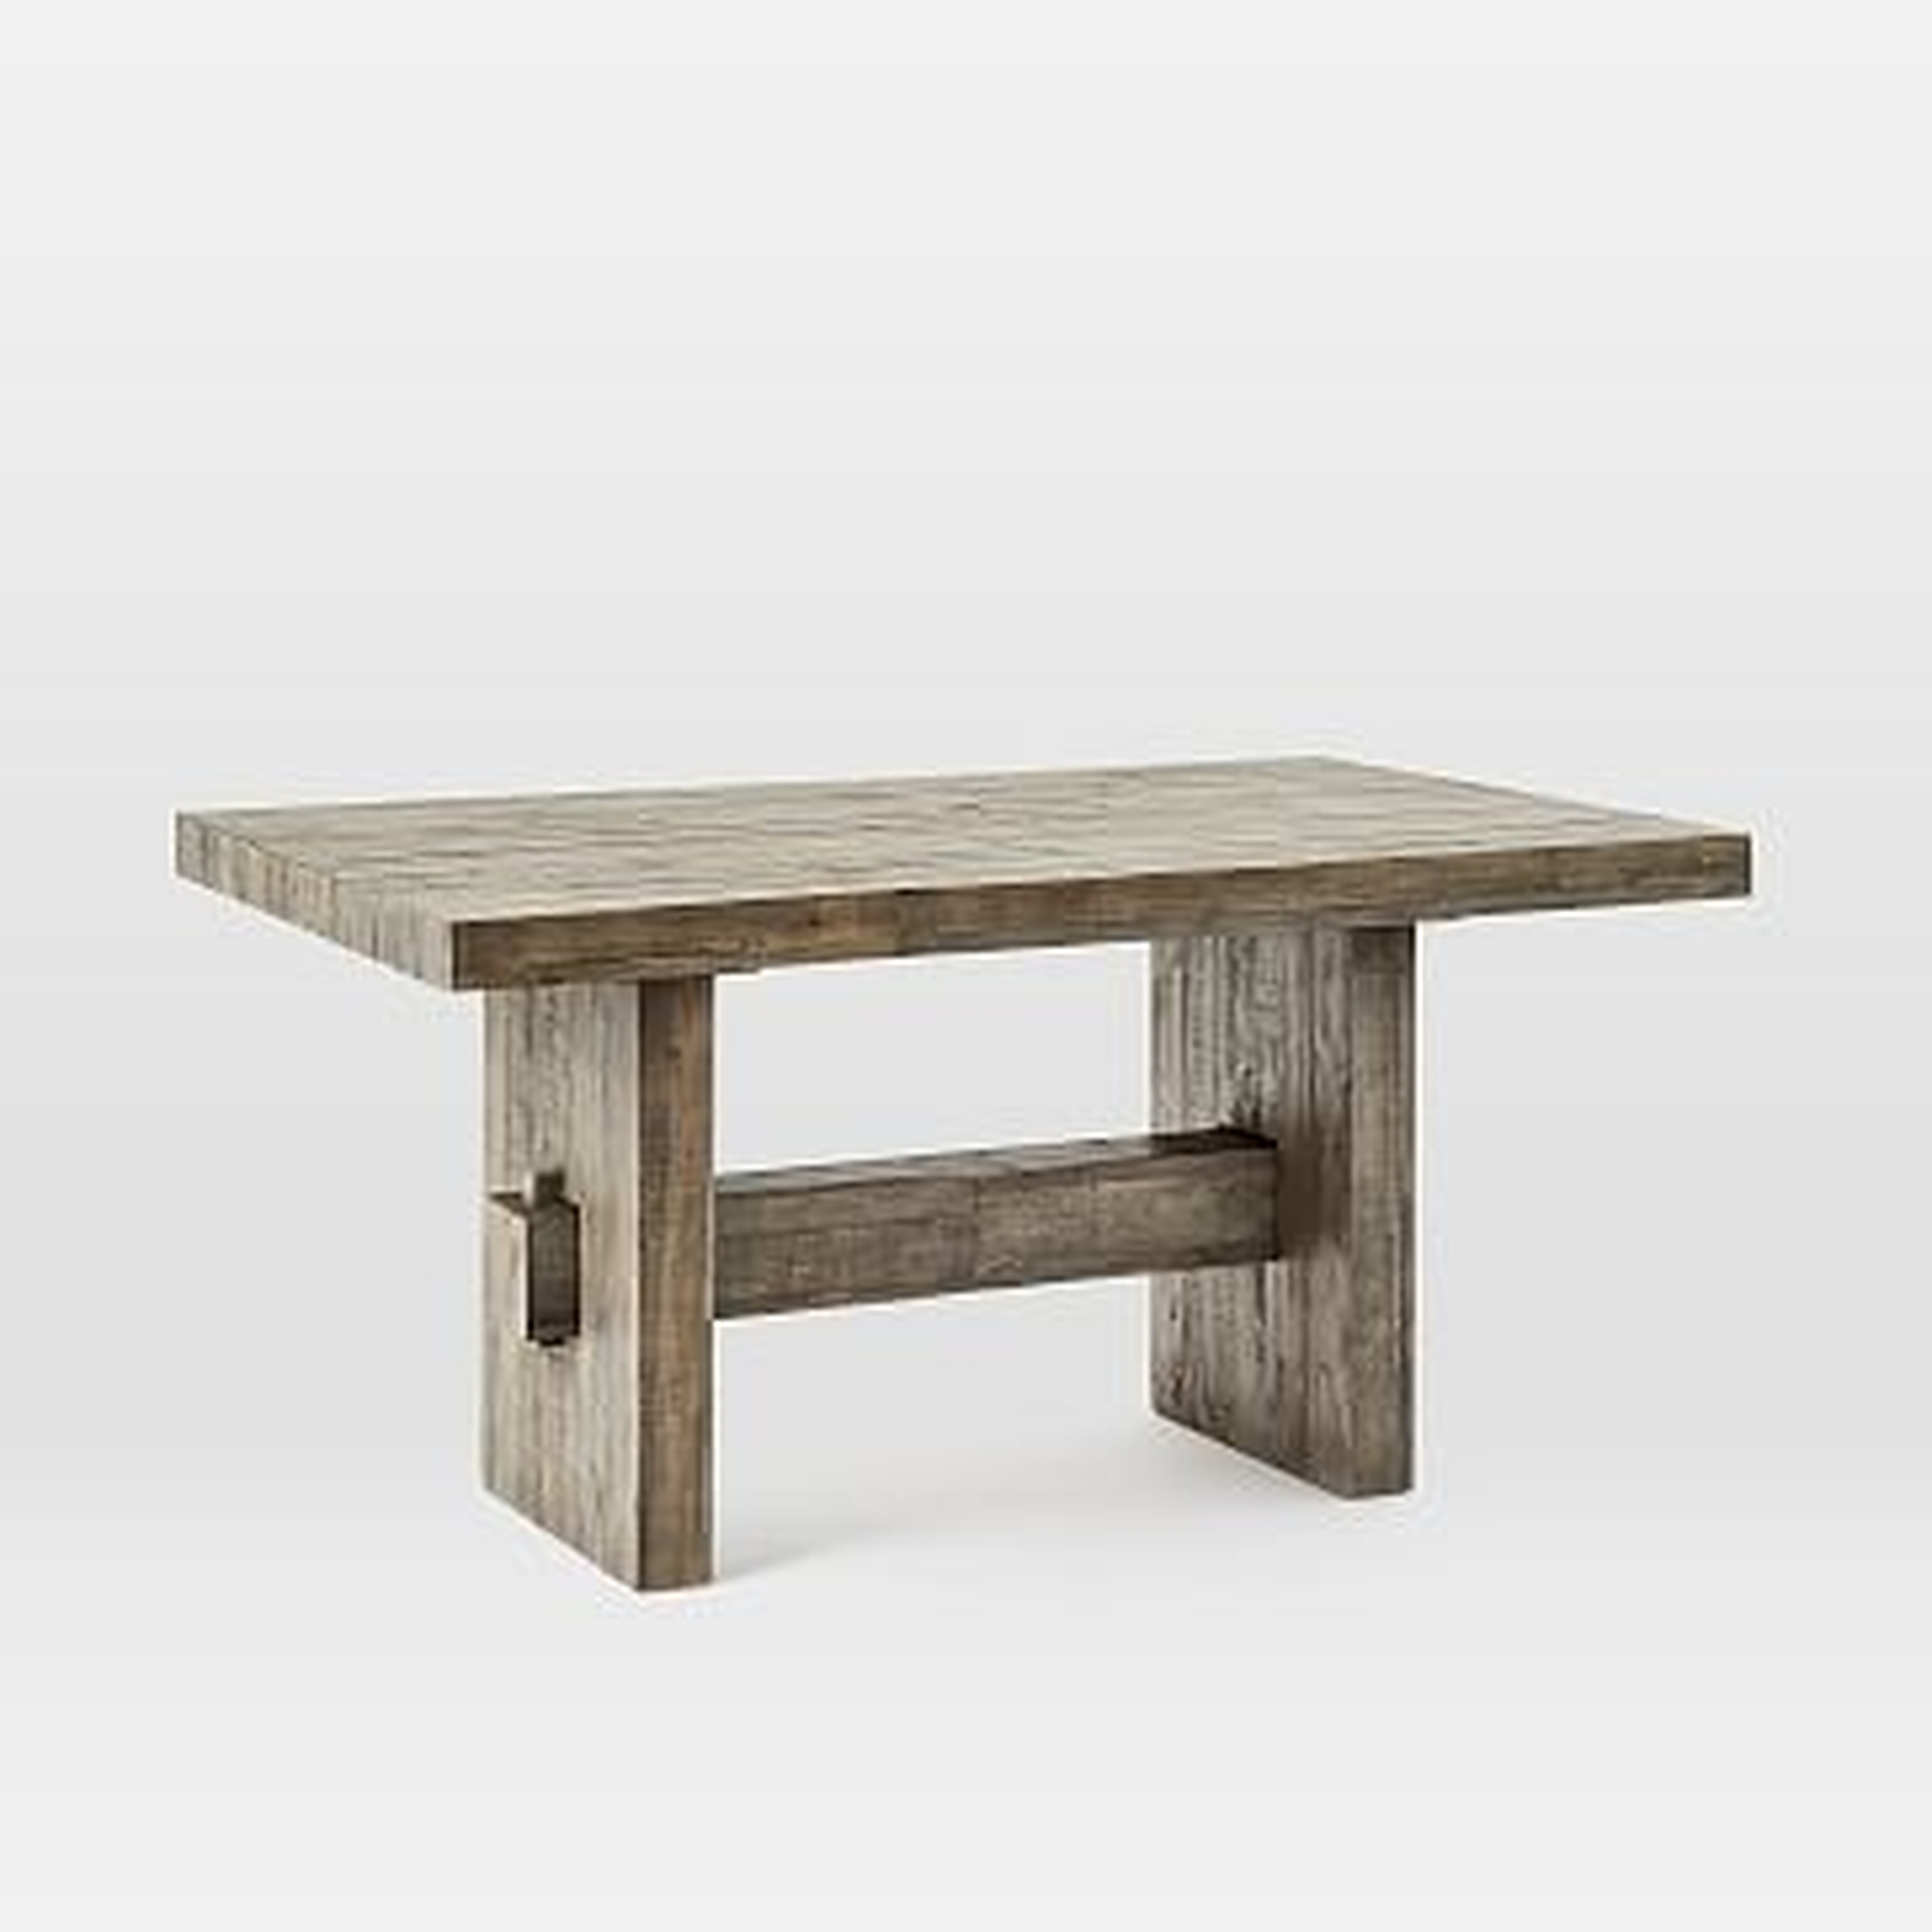 Emmerson Dining Table 62", Stone Gray Pine - West Elm